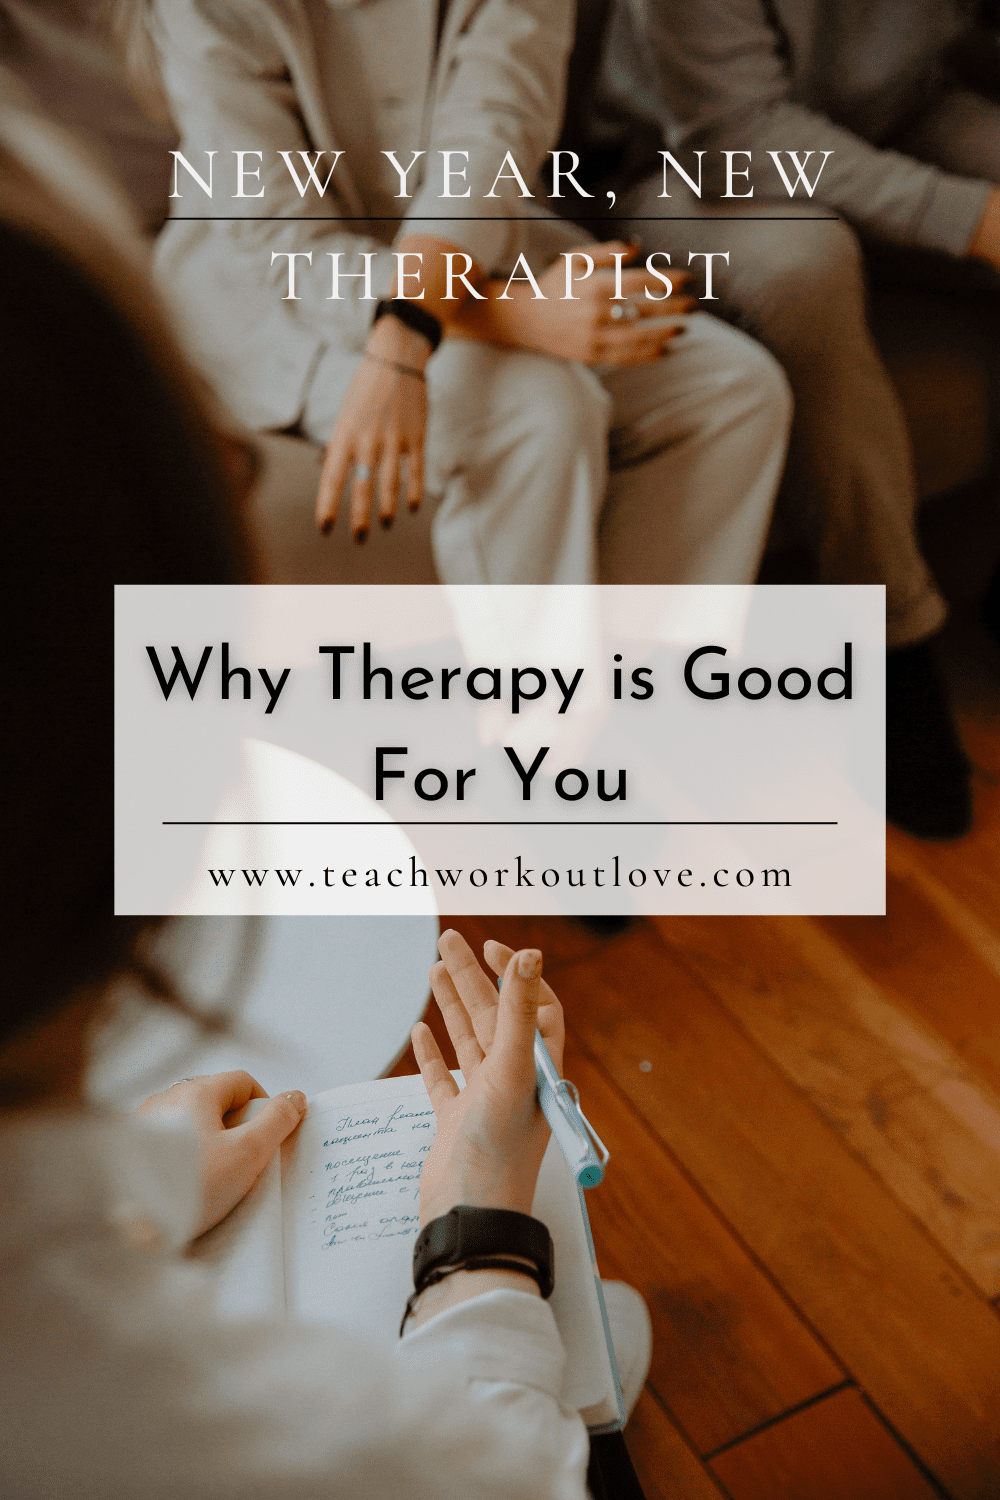 There are so many reasons you should go ahead and go to therapy, but we've got some of those reasons below to hopefully convince you that it's the best idea.